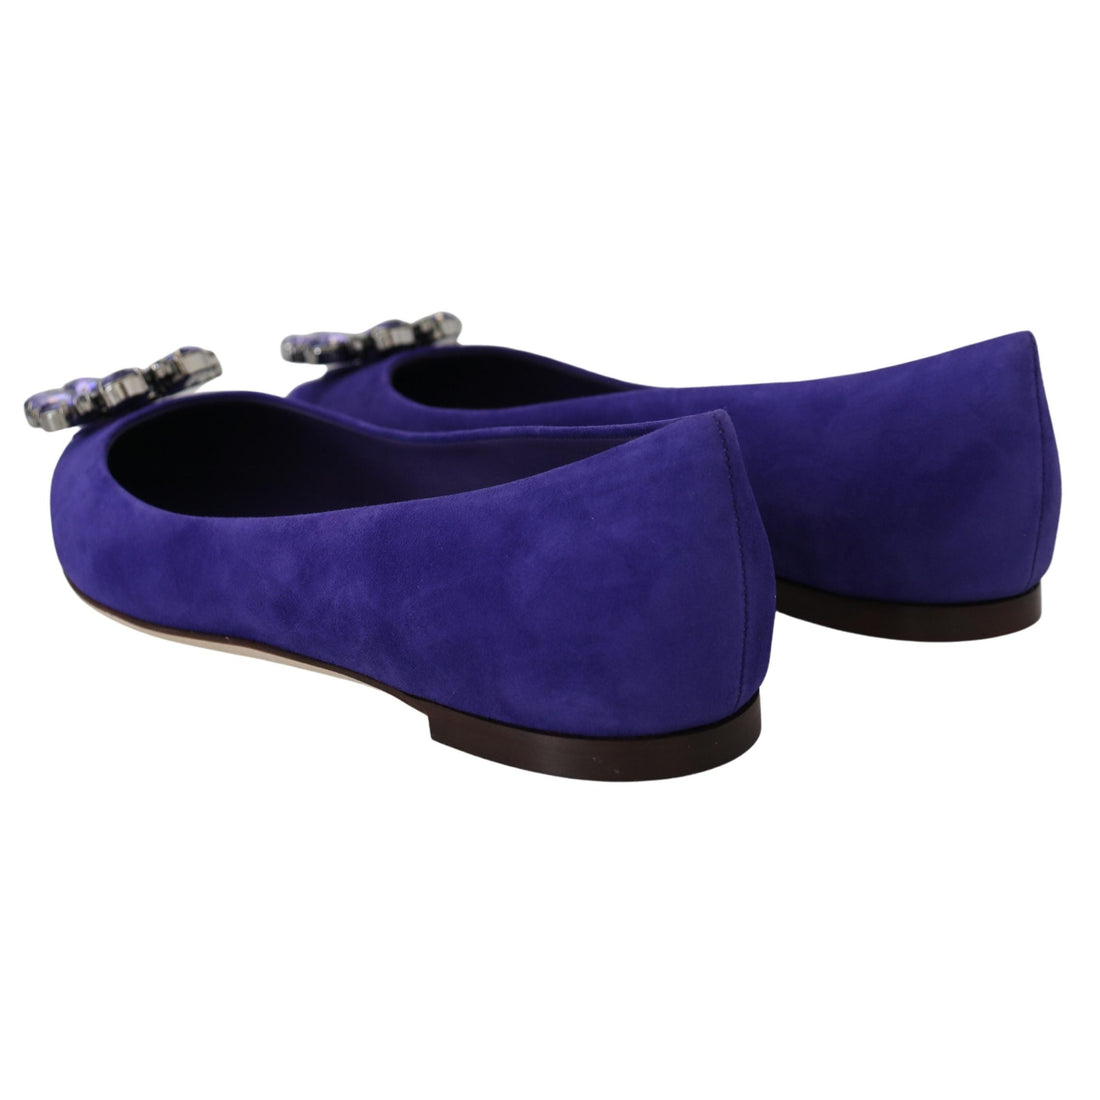 Dolce & Gabbana Purple Suede Crystals Loafers Flats Shoes